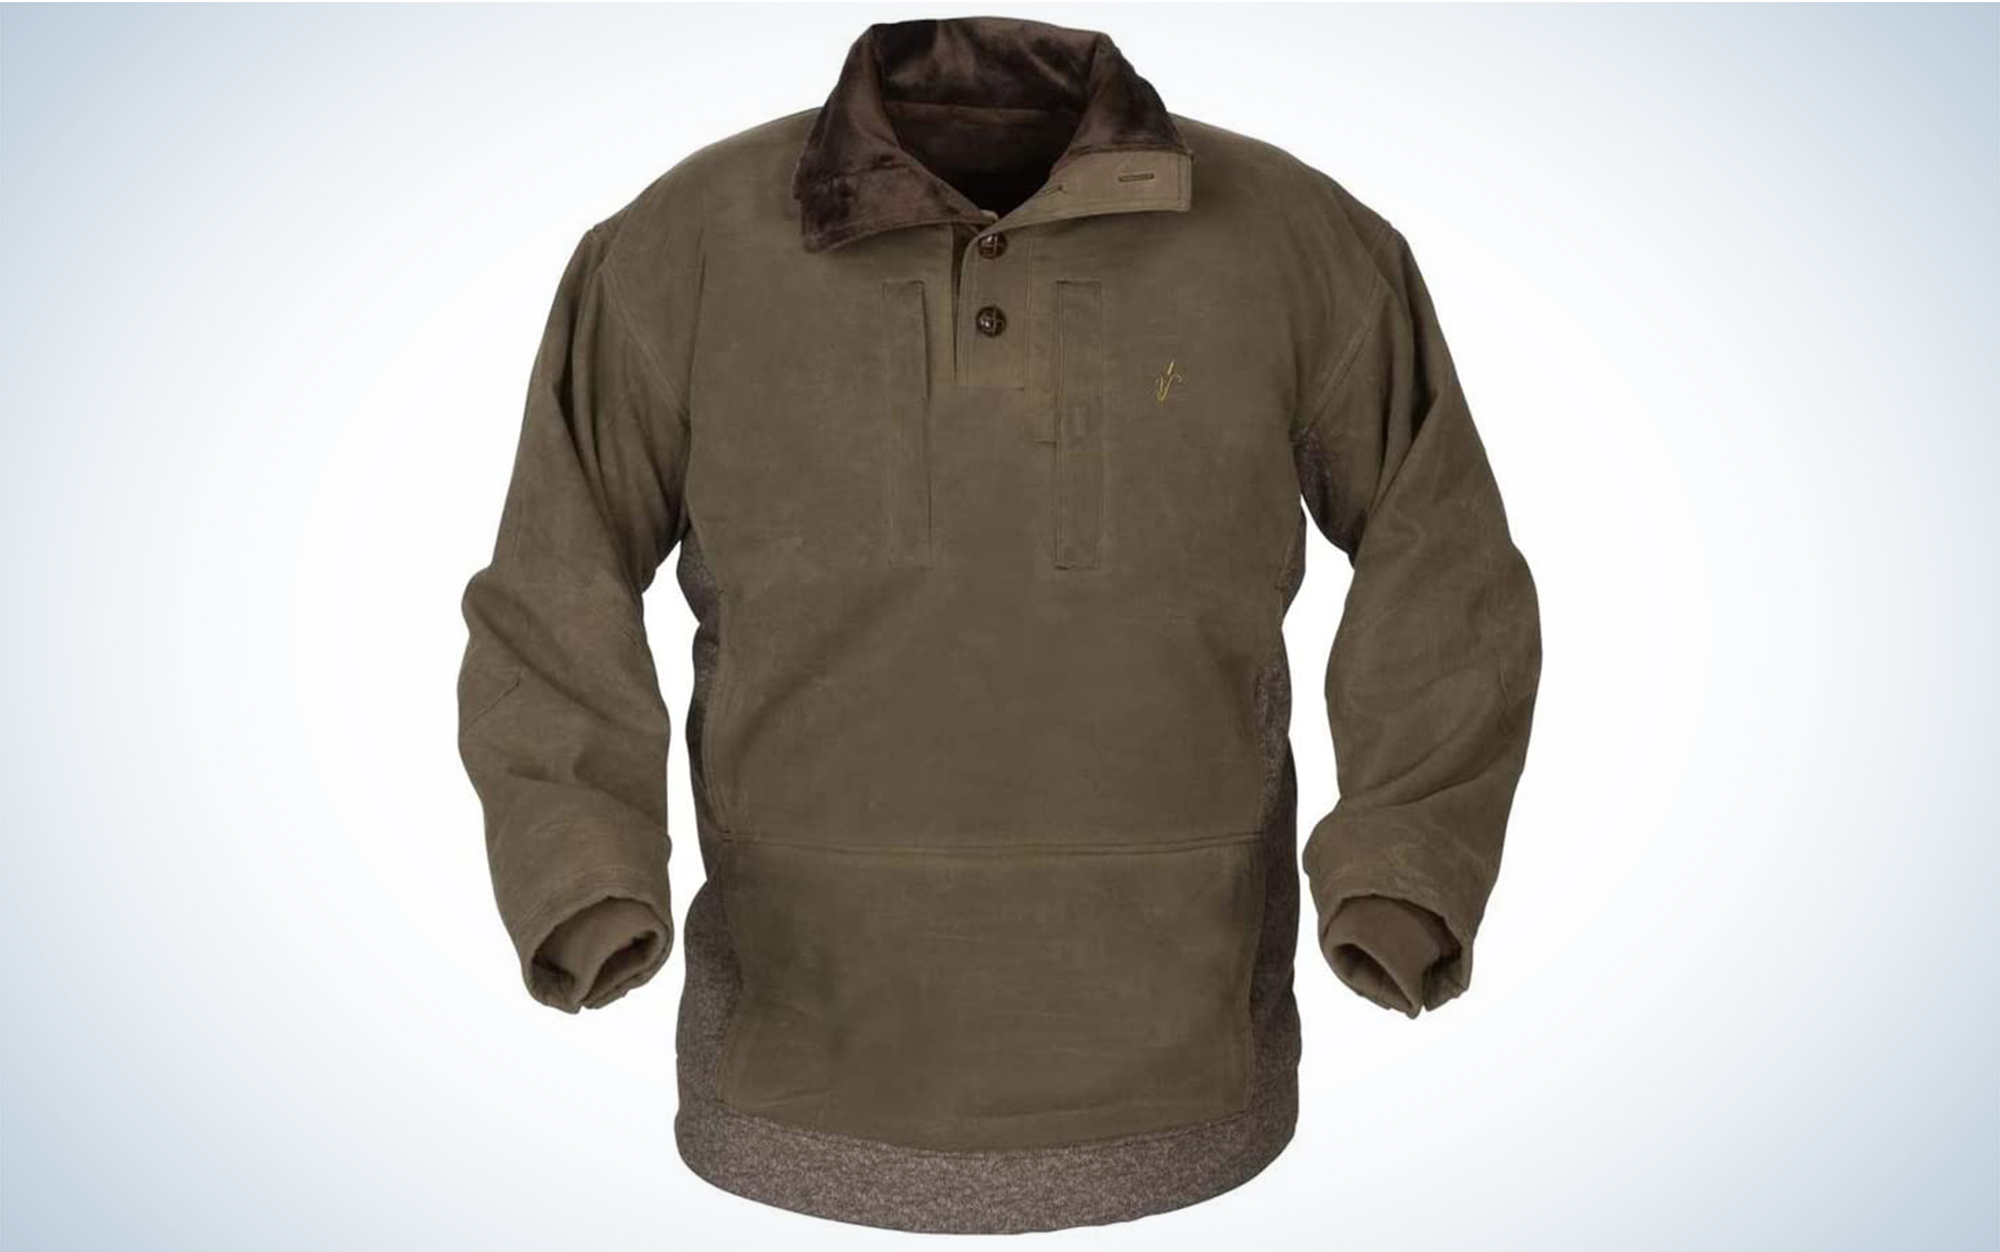 The Avery Heritage Waterfowl Sweater is the best old school duck hunting jacket.